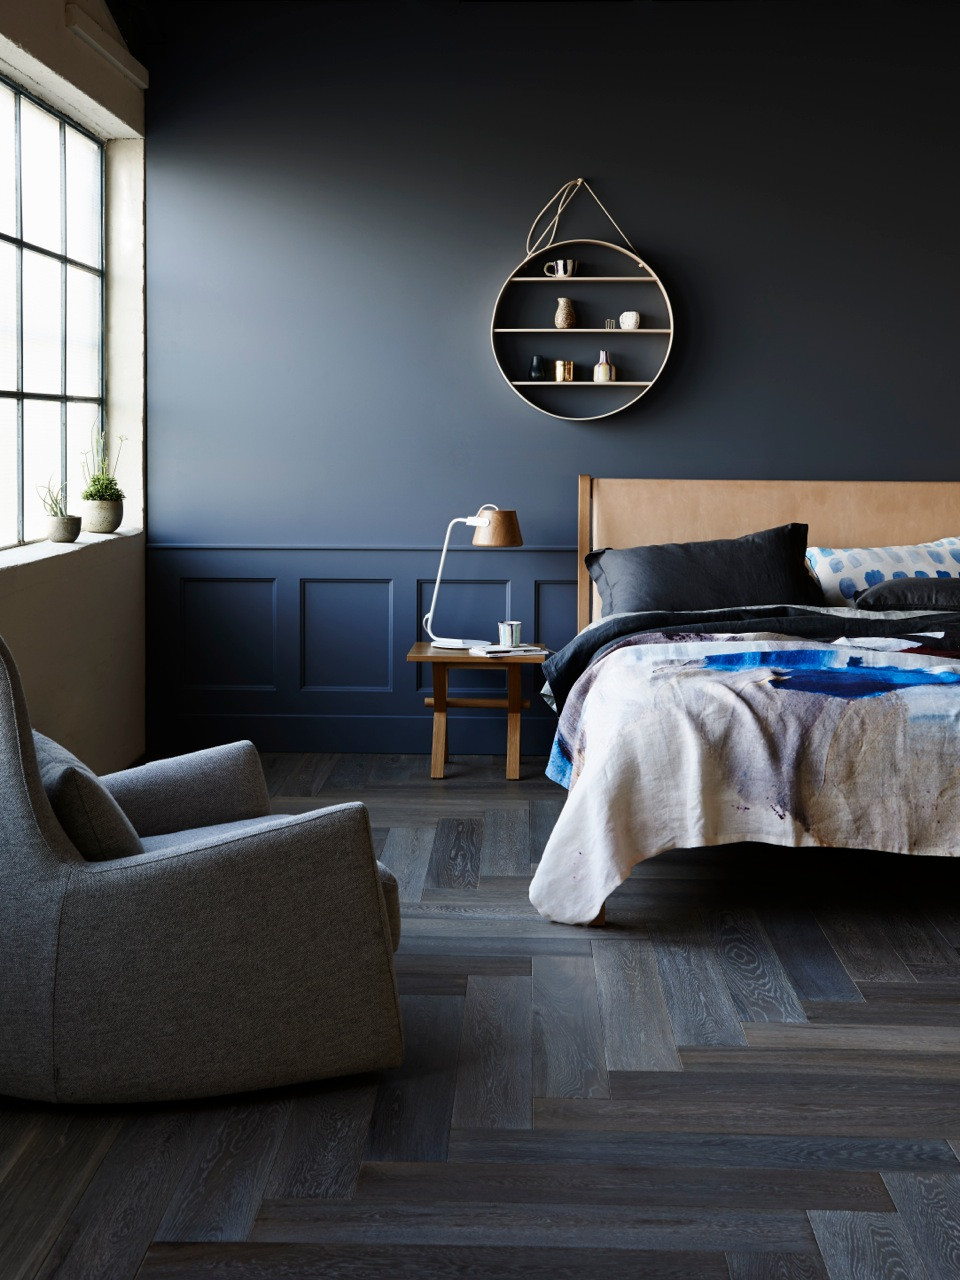 Blue Bedroom Walls
 Daring to go dark How to bring a designer edge to your home